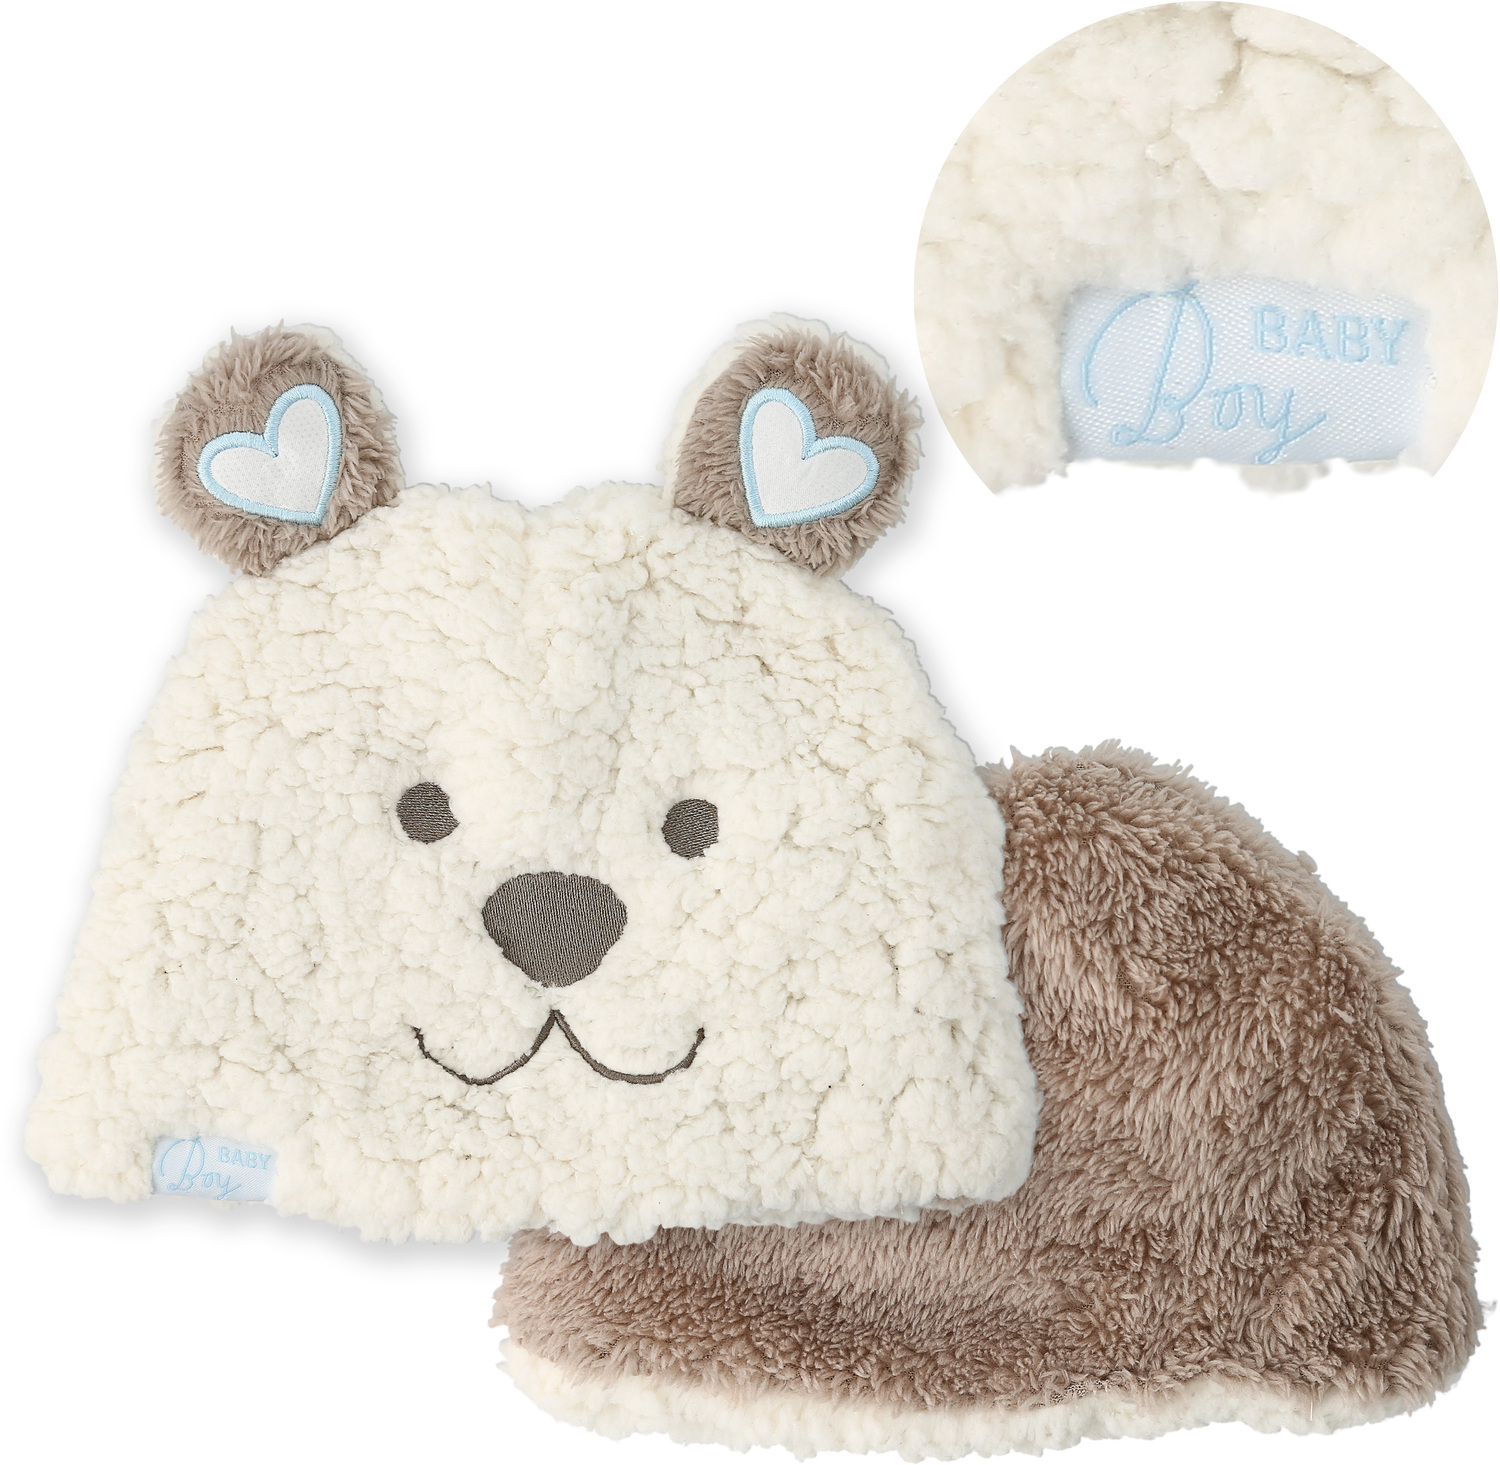 Baby Boy by Comfort Collection - Baby Boy - One Size Fits Most, Baby Bear Hat